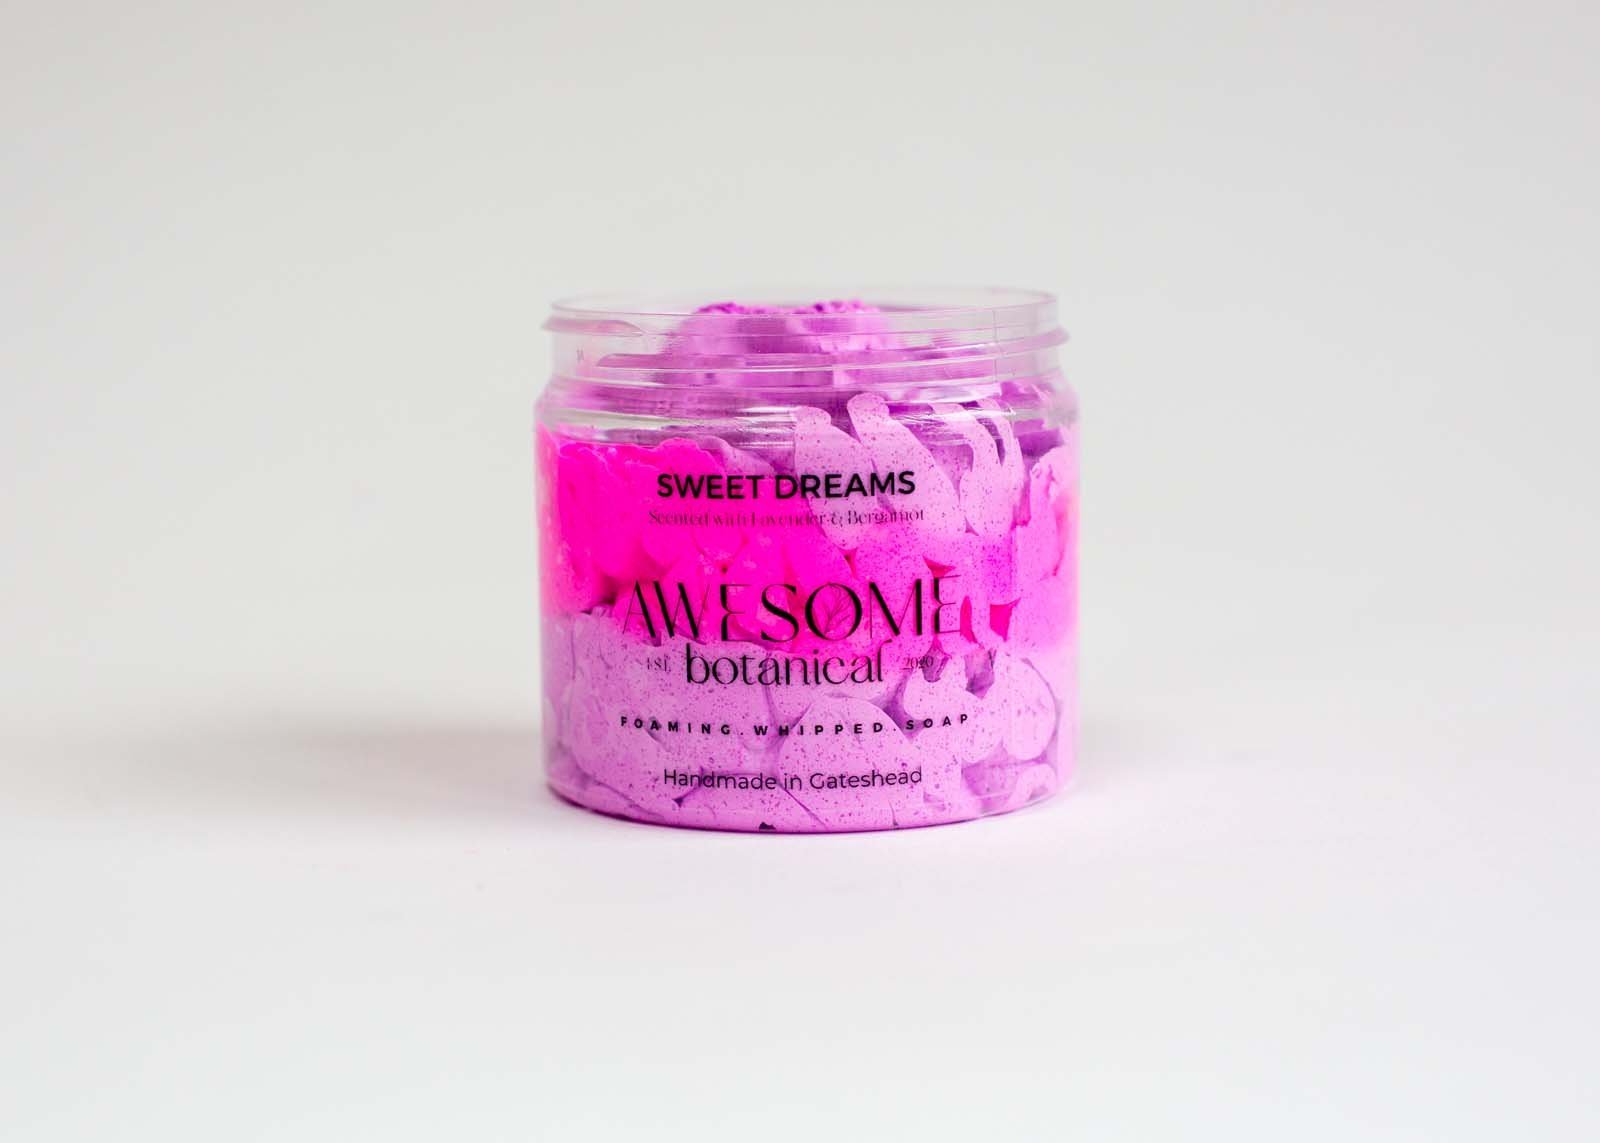 Sweet Dreams whipped soap pink & purple on white back ground